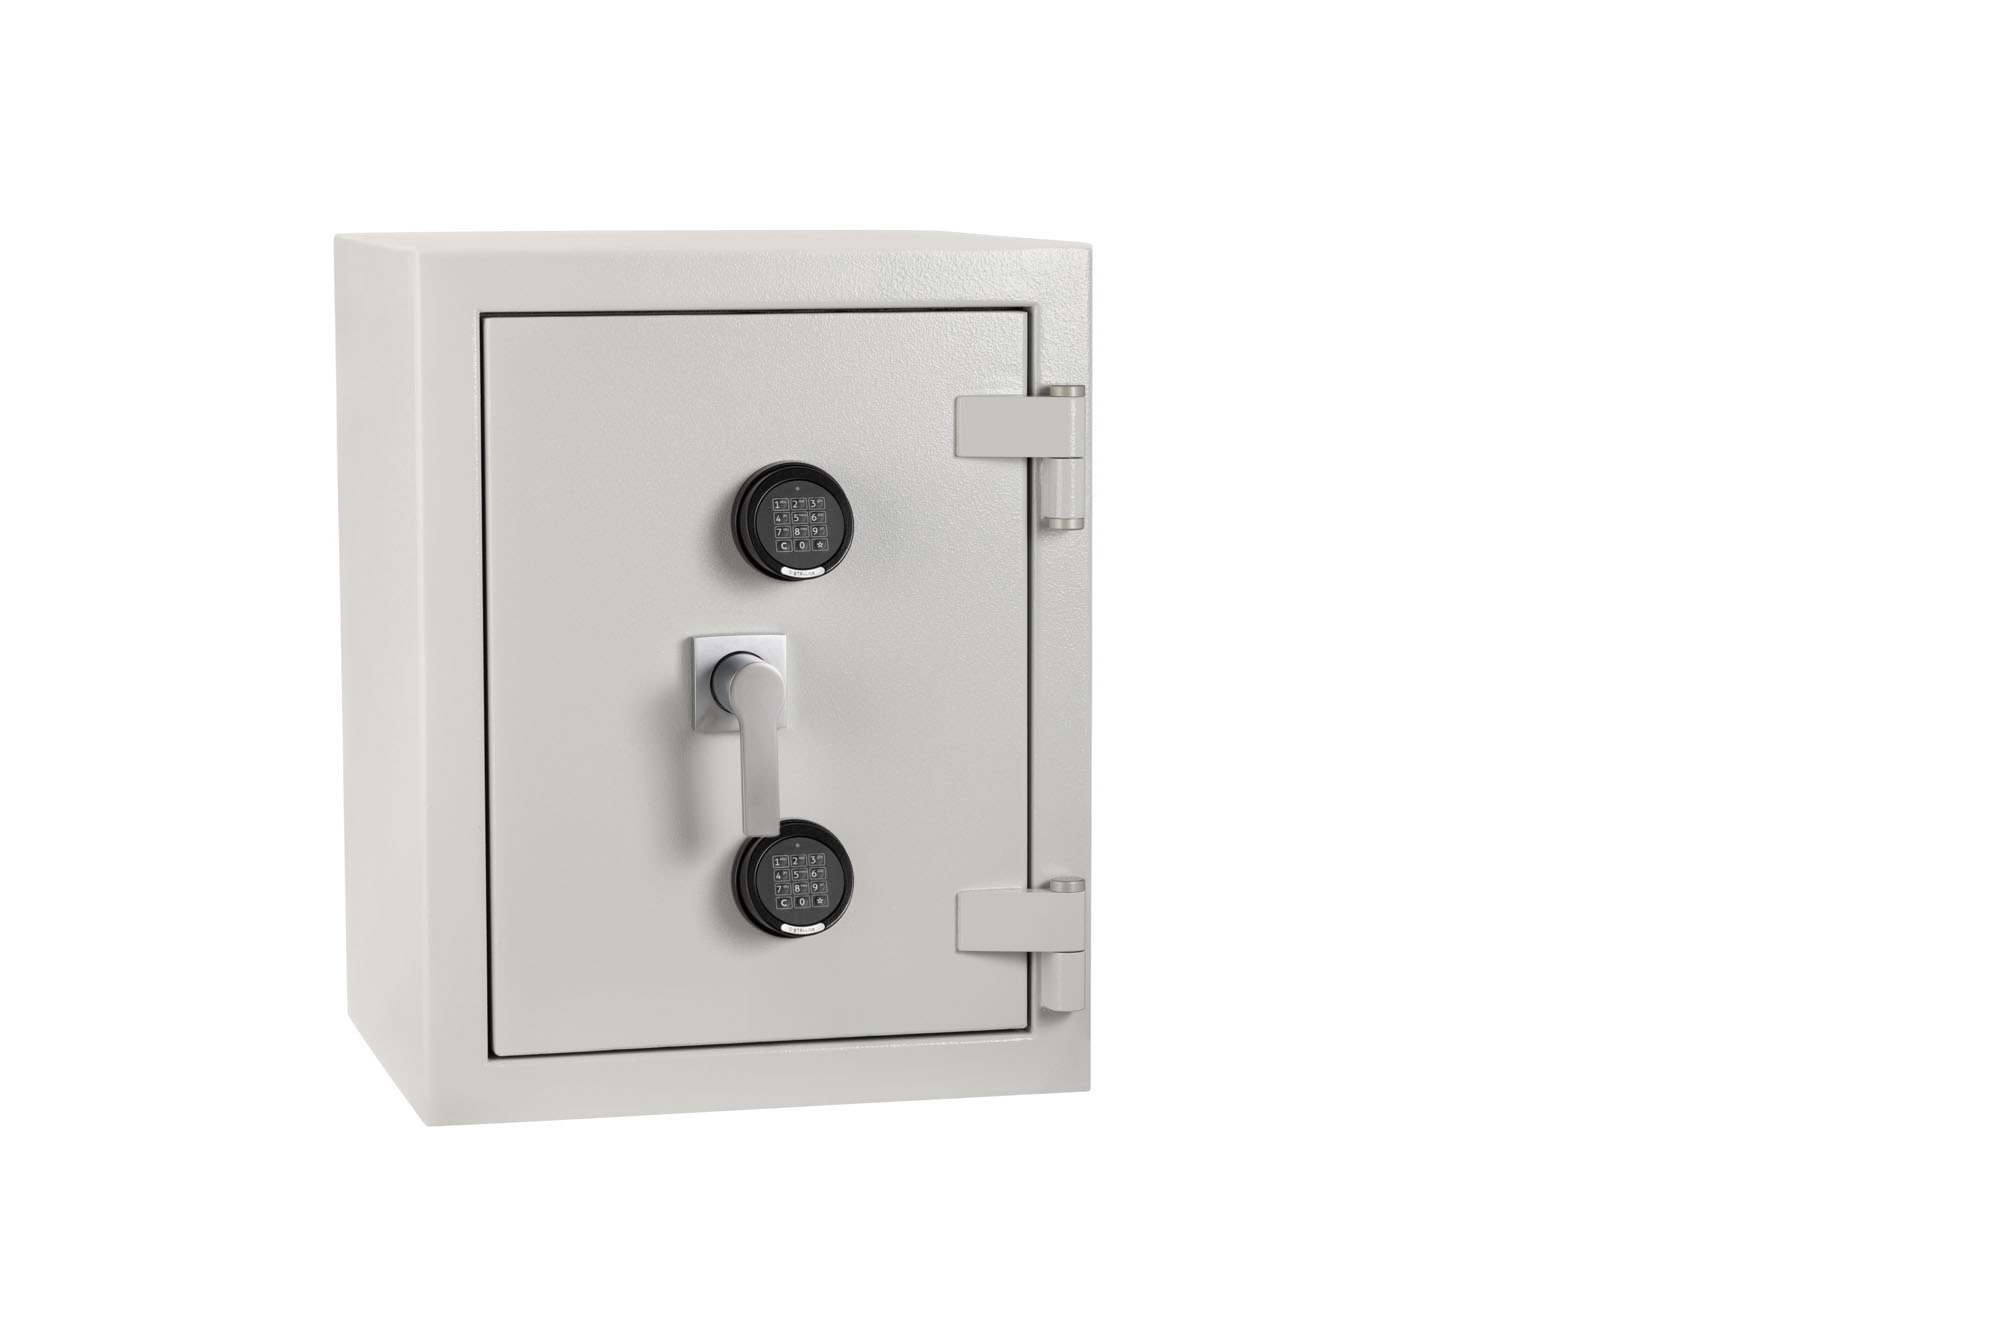 The De Ratt Euro grade 4 2ee is a eurograde4 £60,000 rated security safe for the home, commercial safe, office safe and retail safe that has a 30 minute fire protection for documents. It comes with 2 electronic code locks and is also available with key and electronic lock or twin key locks.